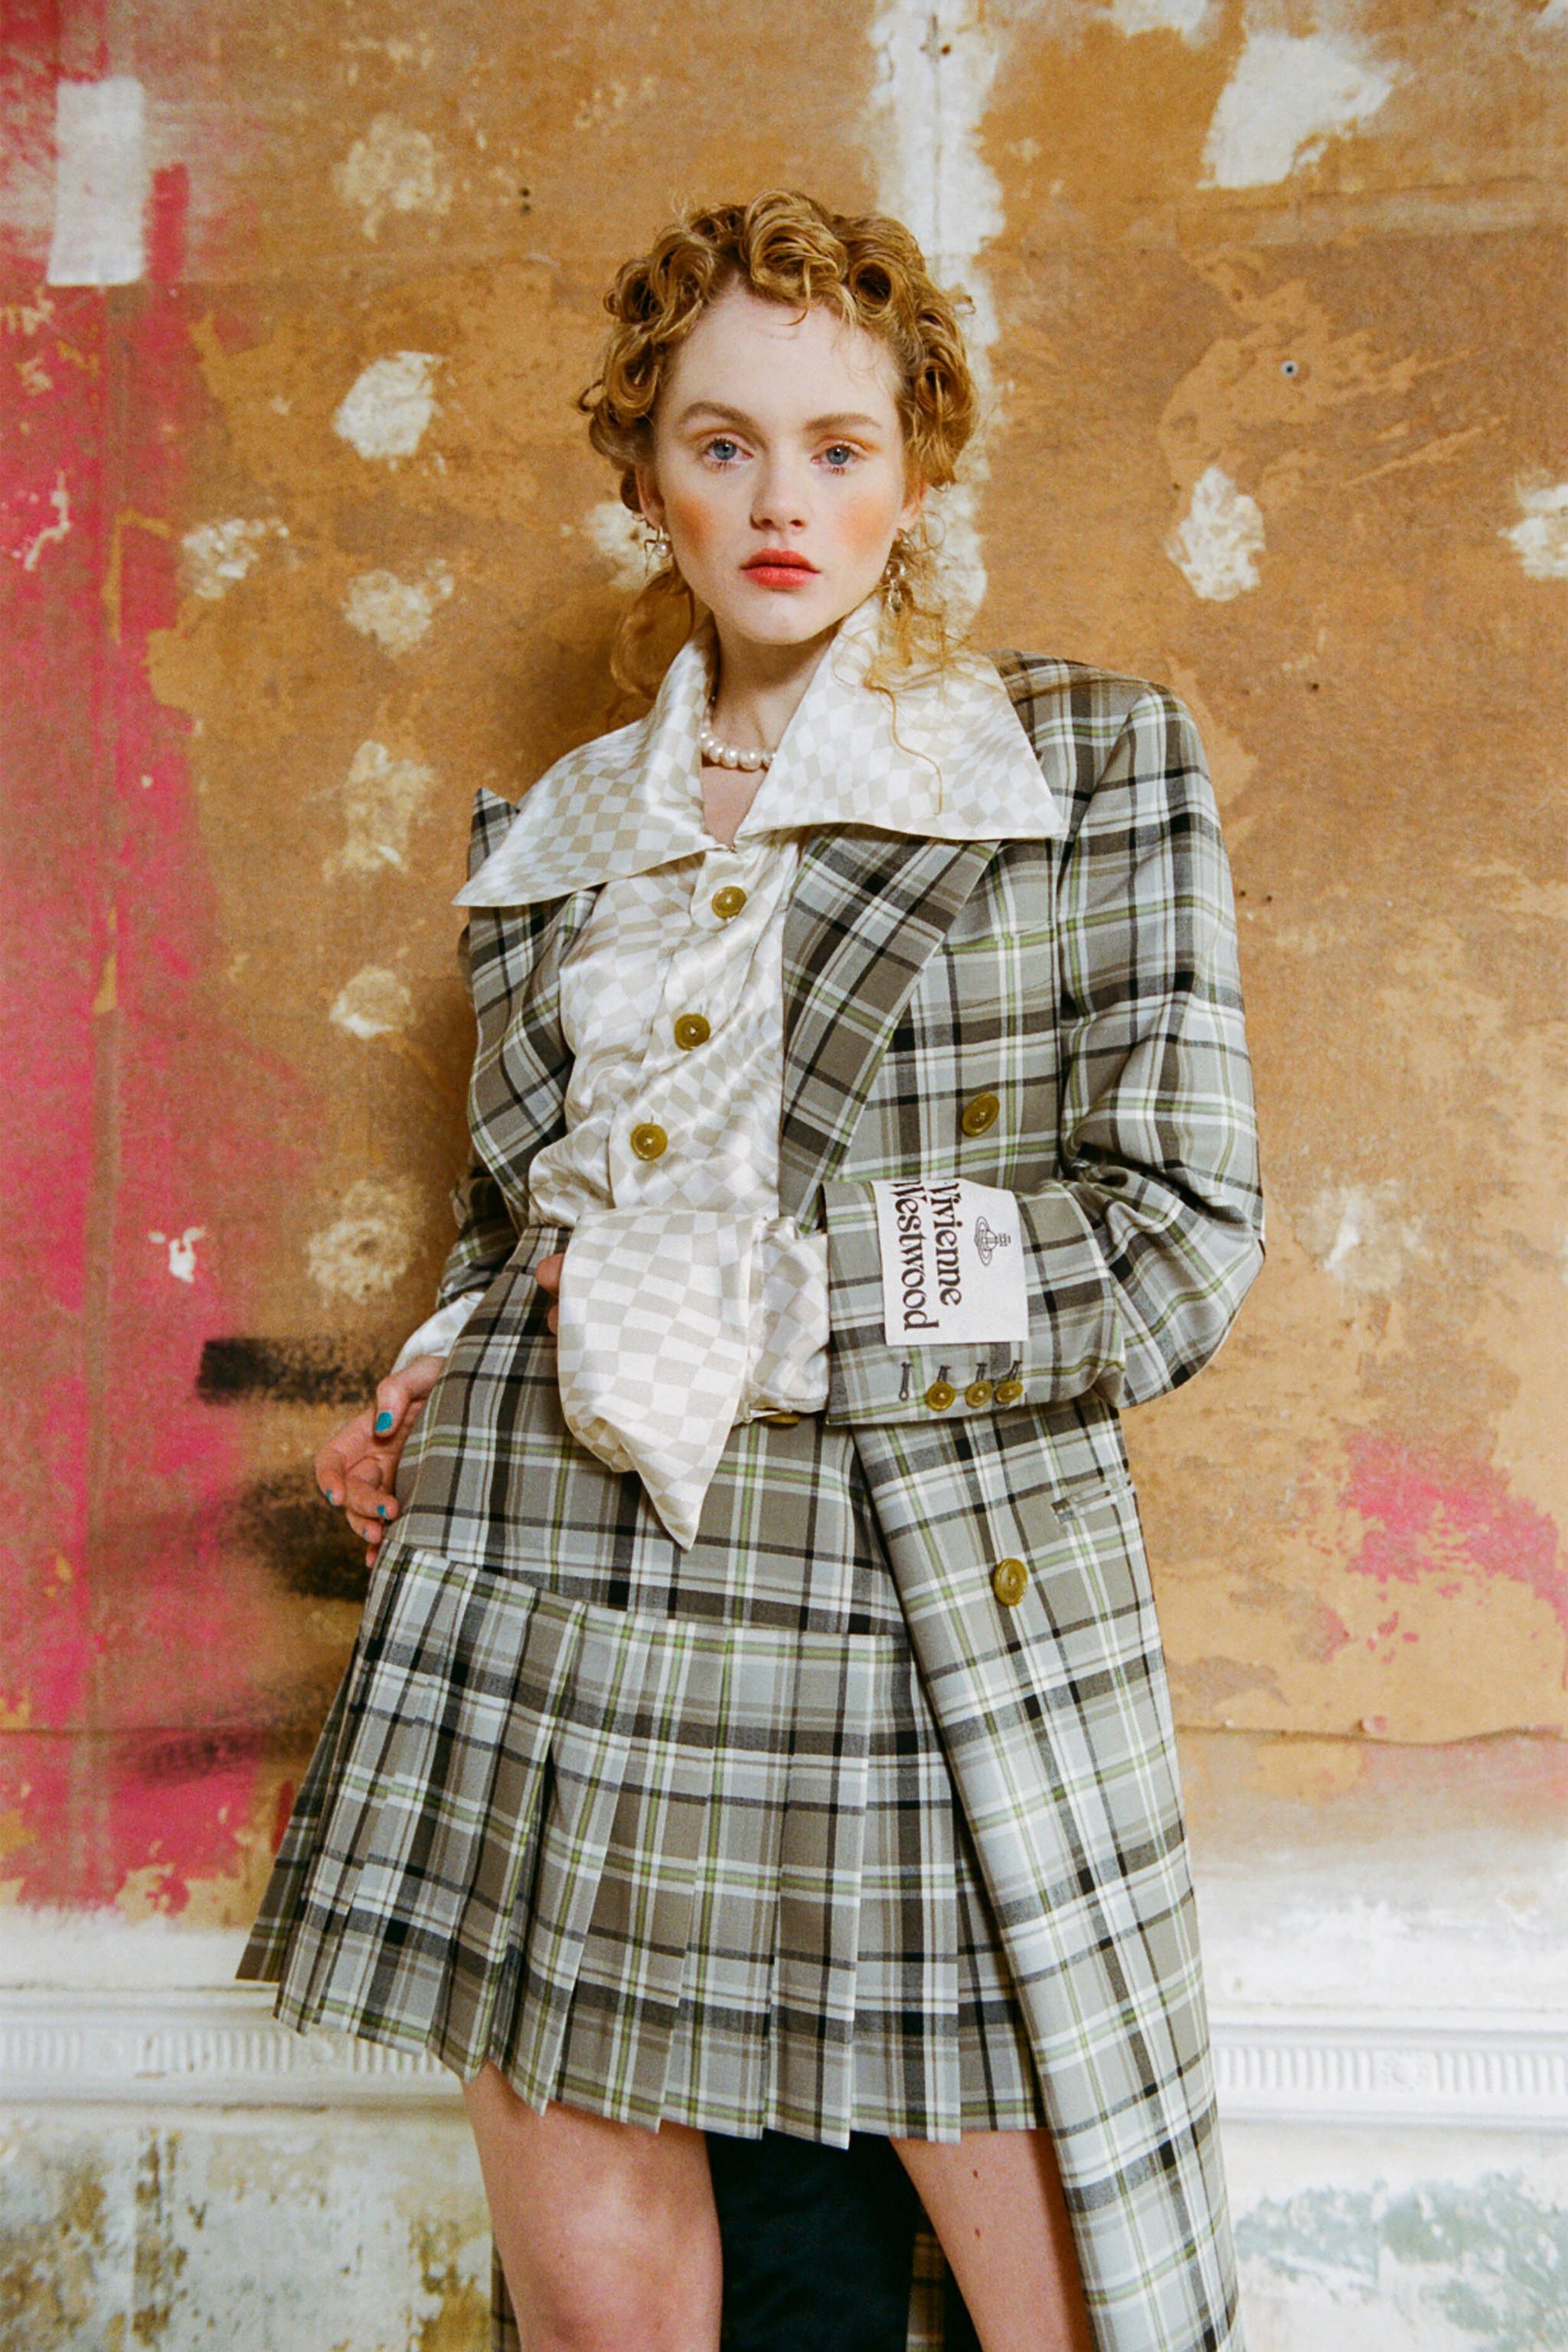 Vivienne Westwood's '90s-Era Boucher Print Has Stood The Test Of Time